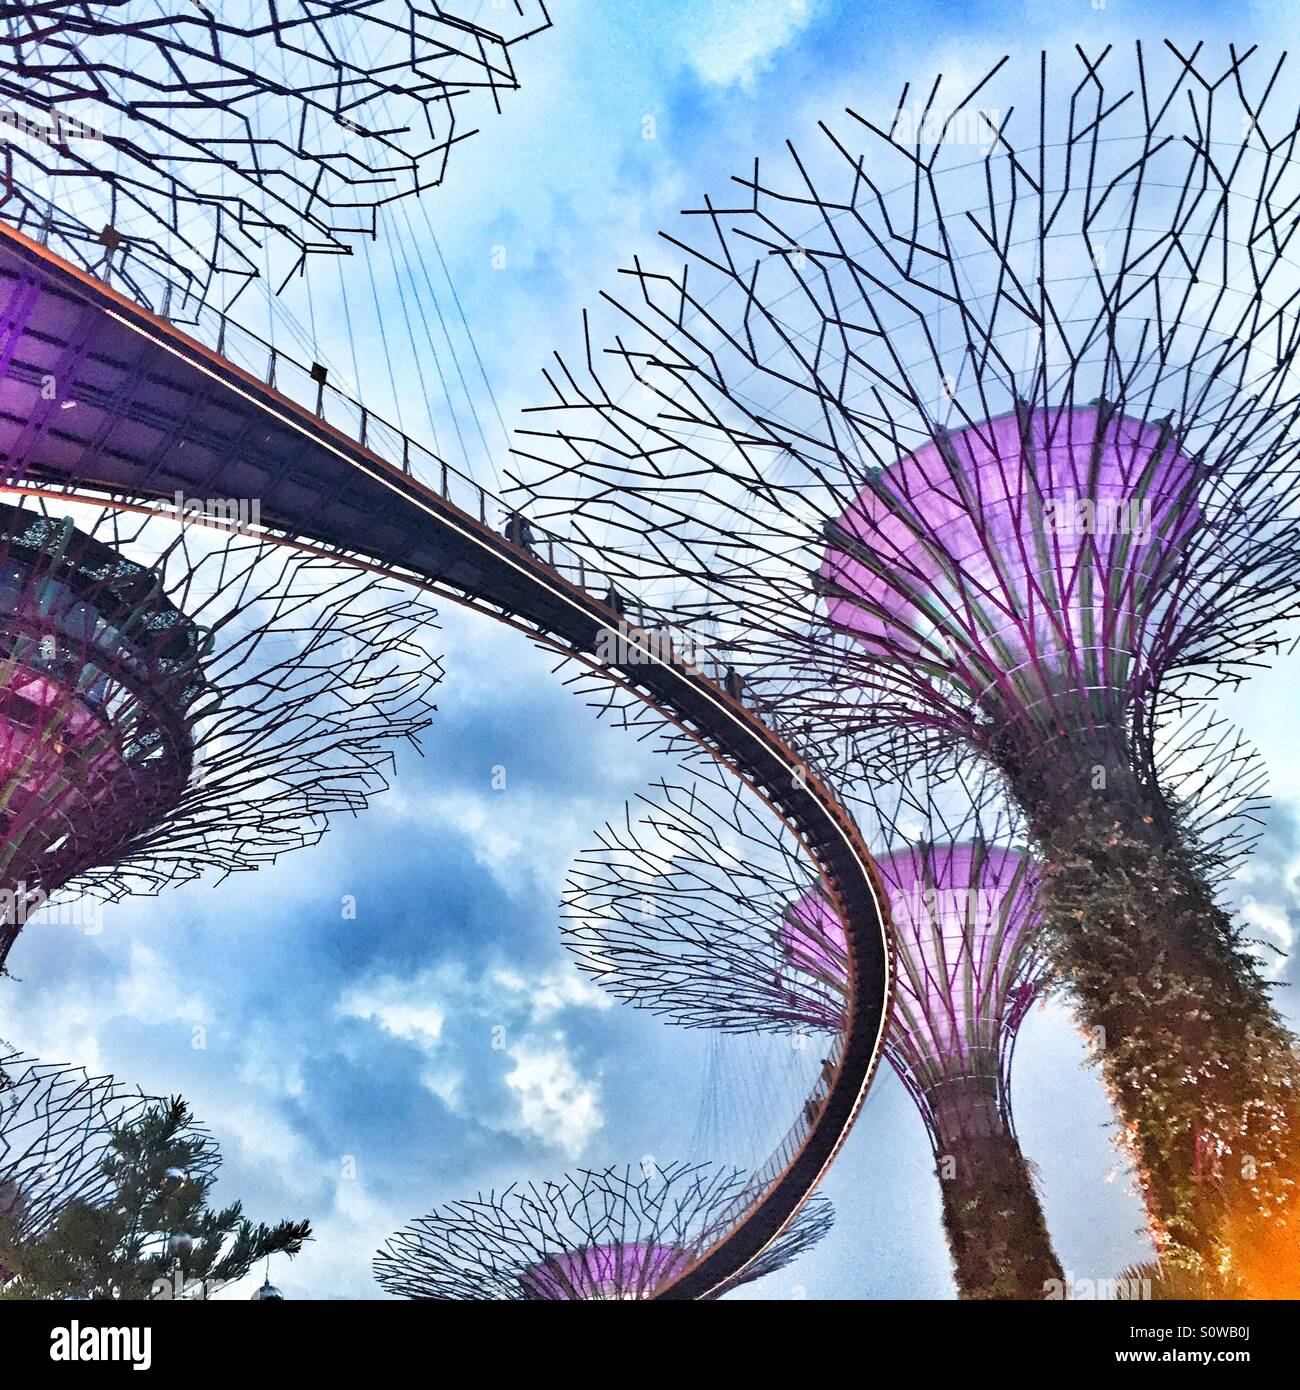 Supertrees in Singapore Stock Photo